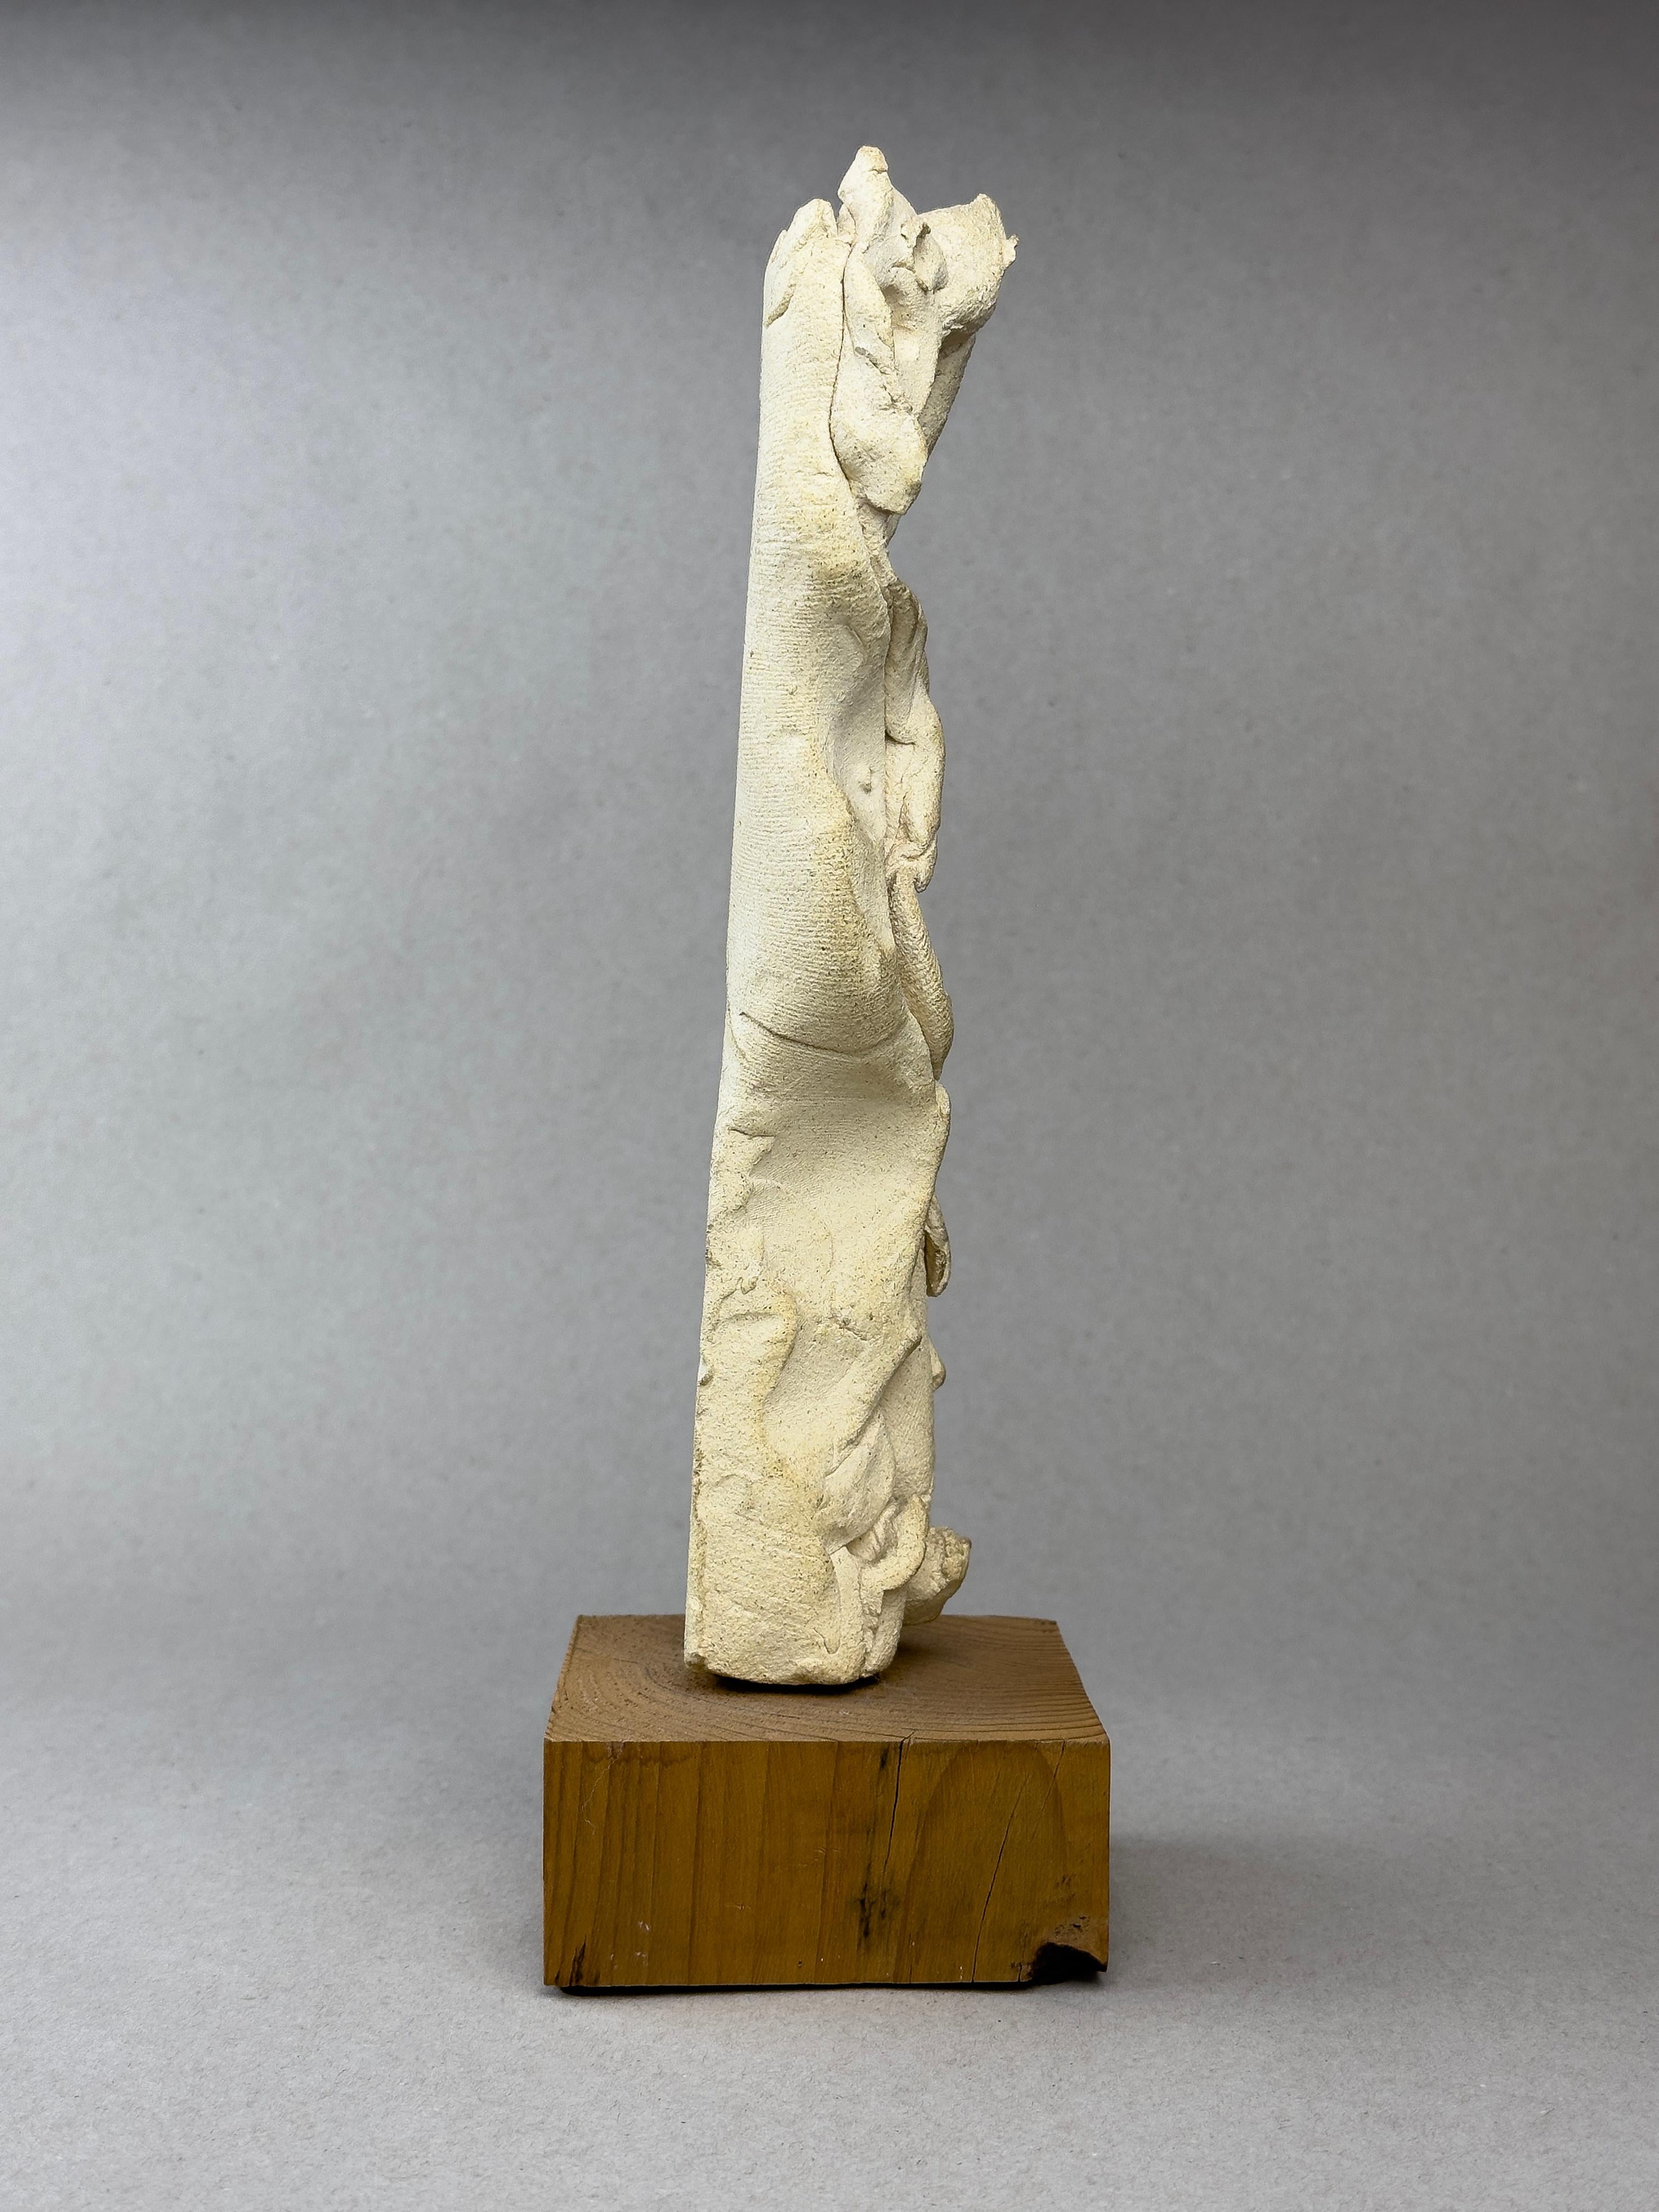 EMERSON WOELFFER
Abstract Form No. 1
1979

Porcelain on wooden plinth

3.5 x 3.5 x 11.5 inches